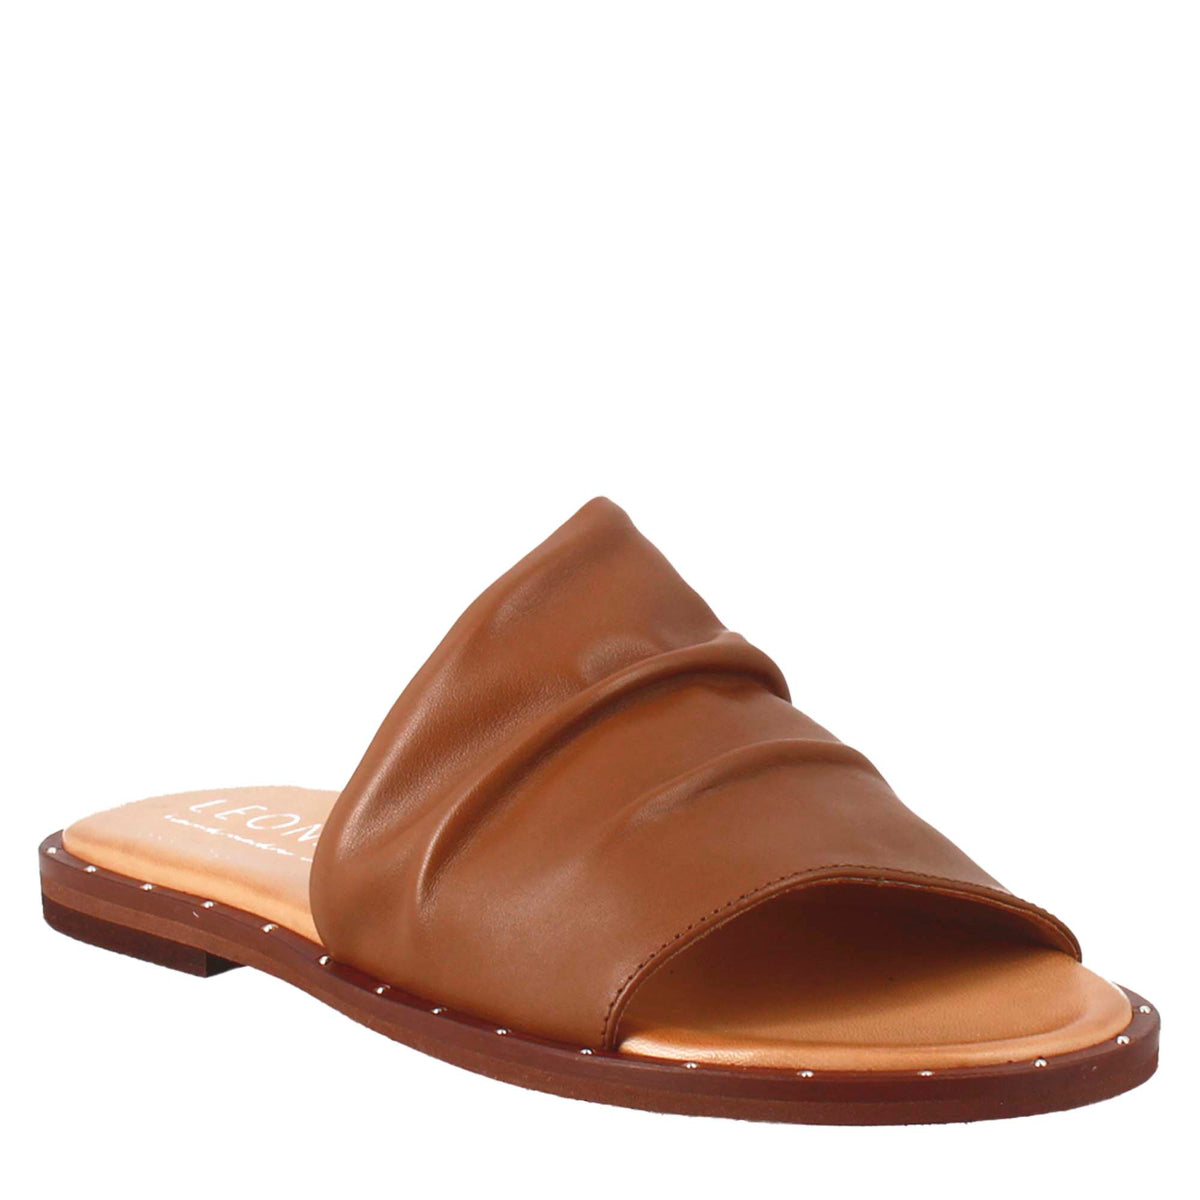 Women's band sandal in brown leather 